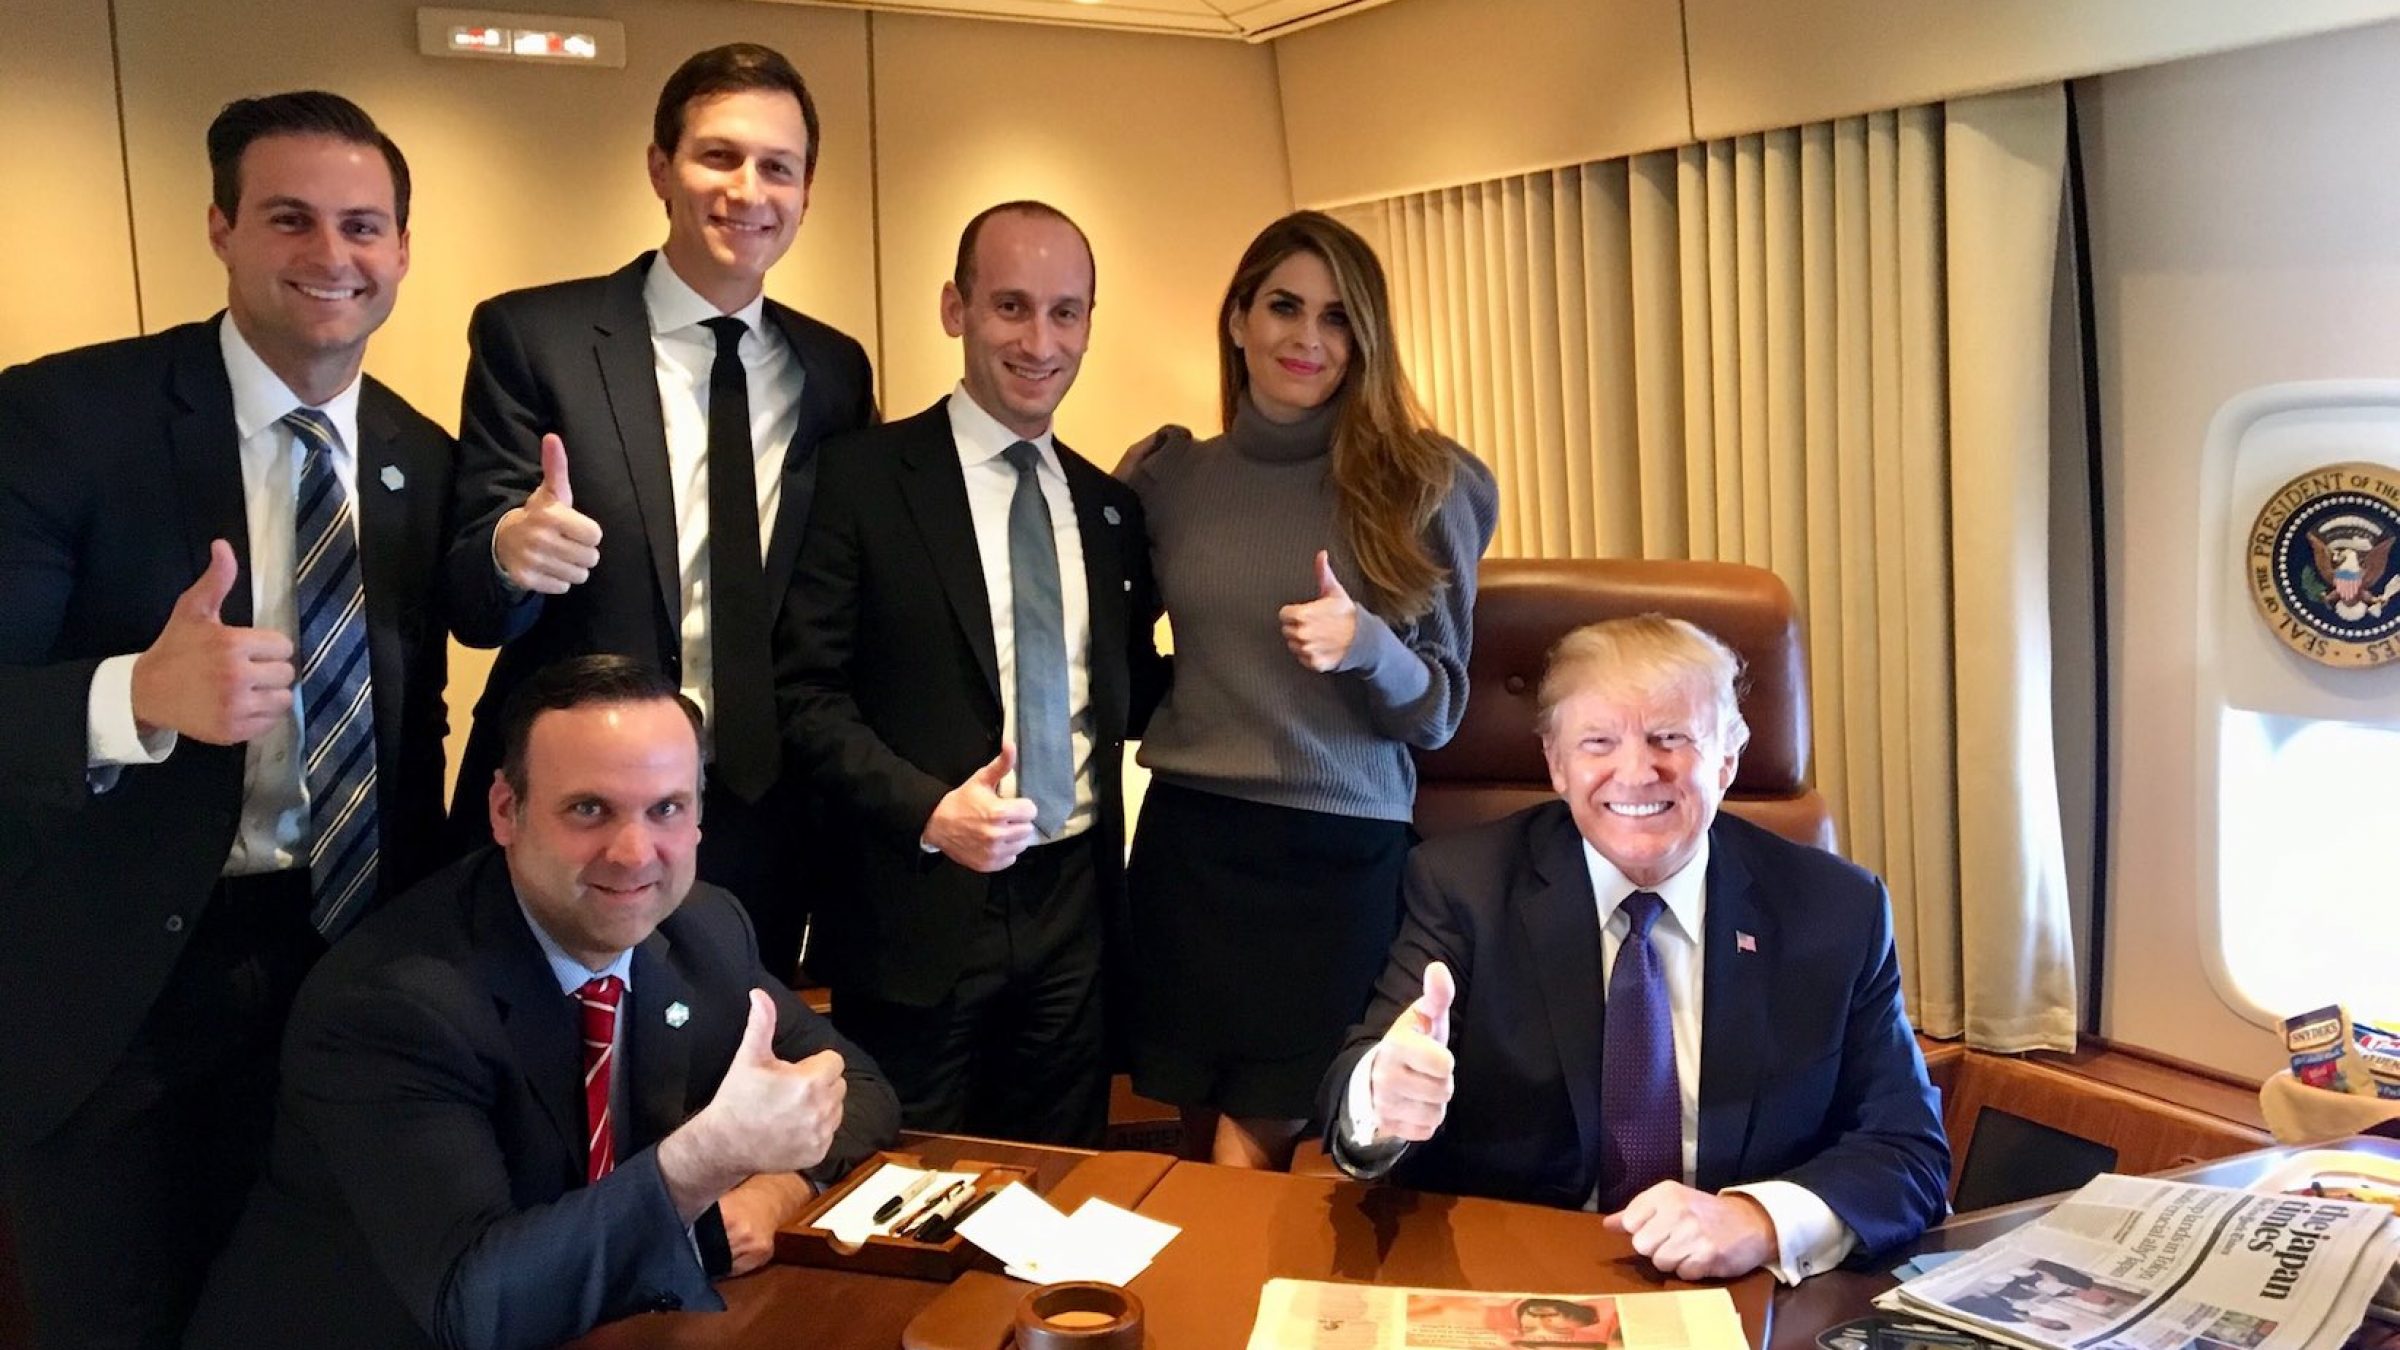 Donald Trump and several aides, including Hope Hicks and Jared Kushner, smile and give "thumbs up" signs while in the Air Force One office